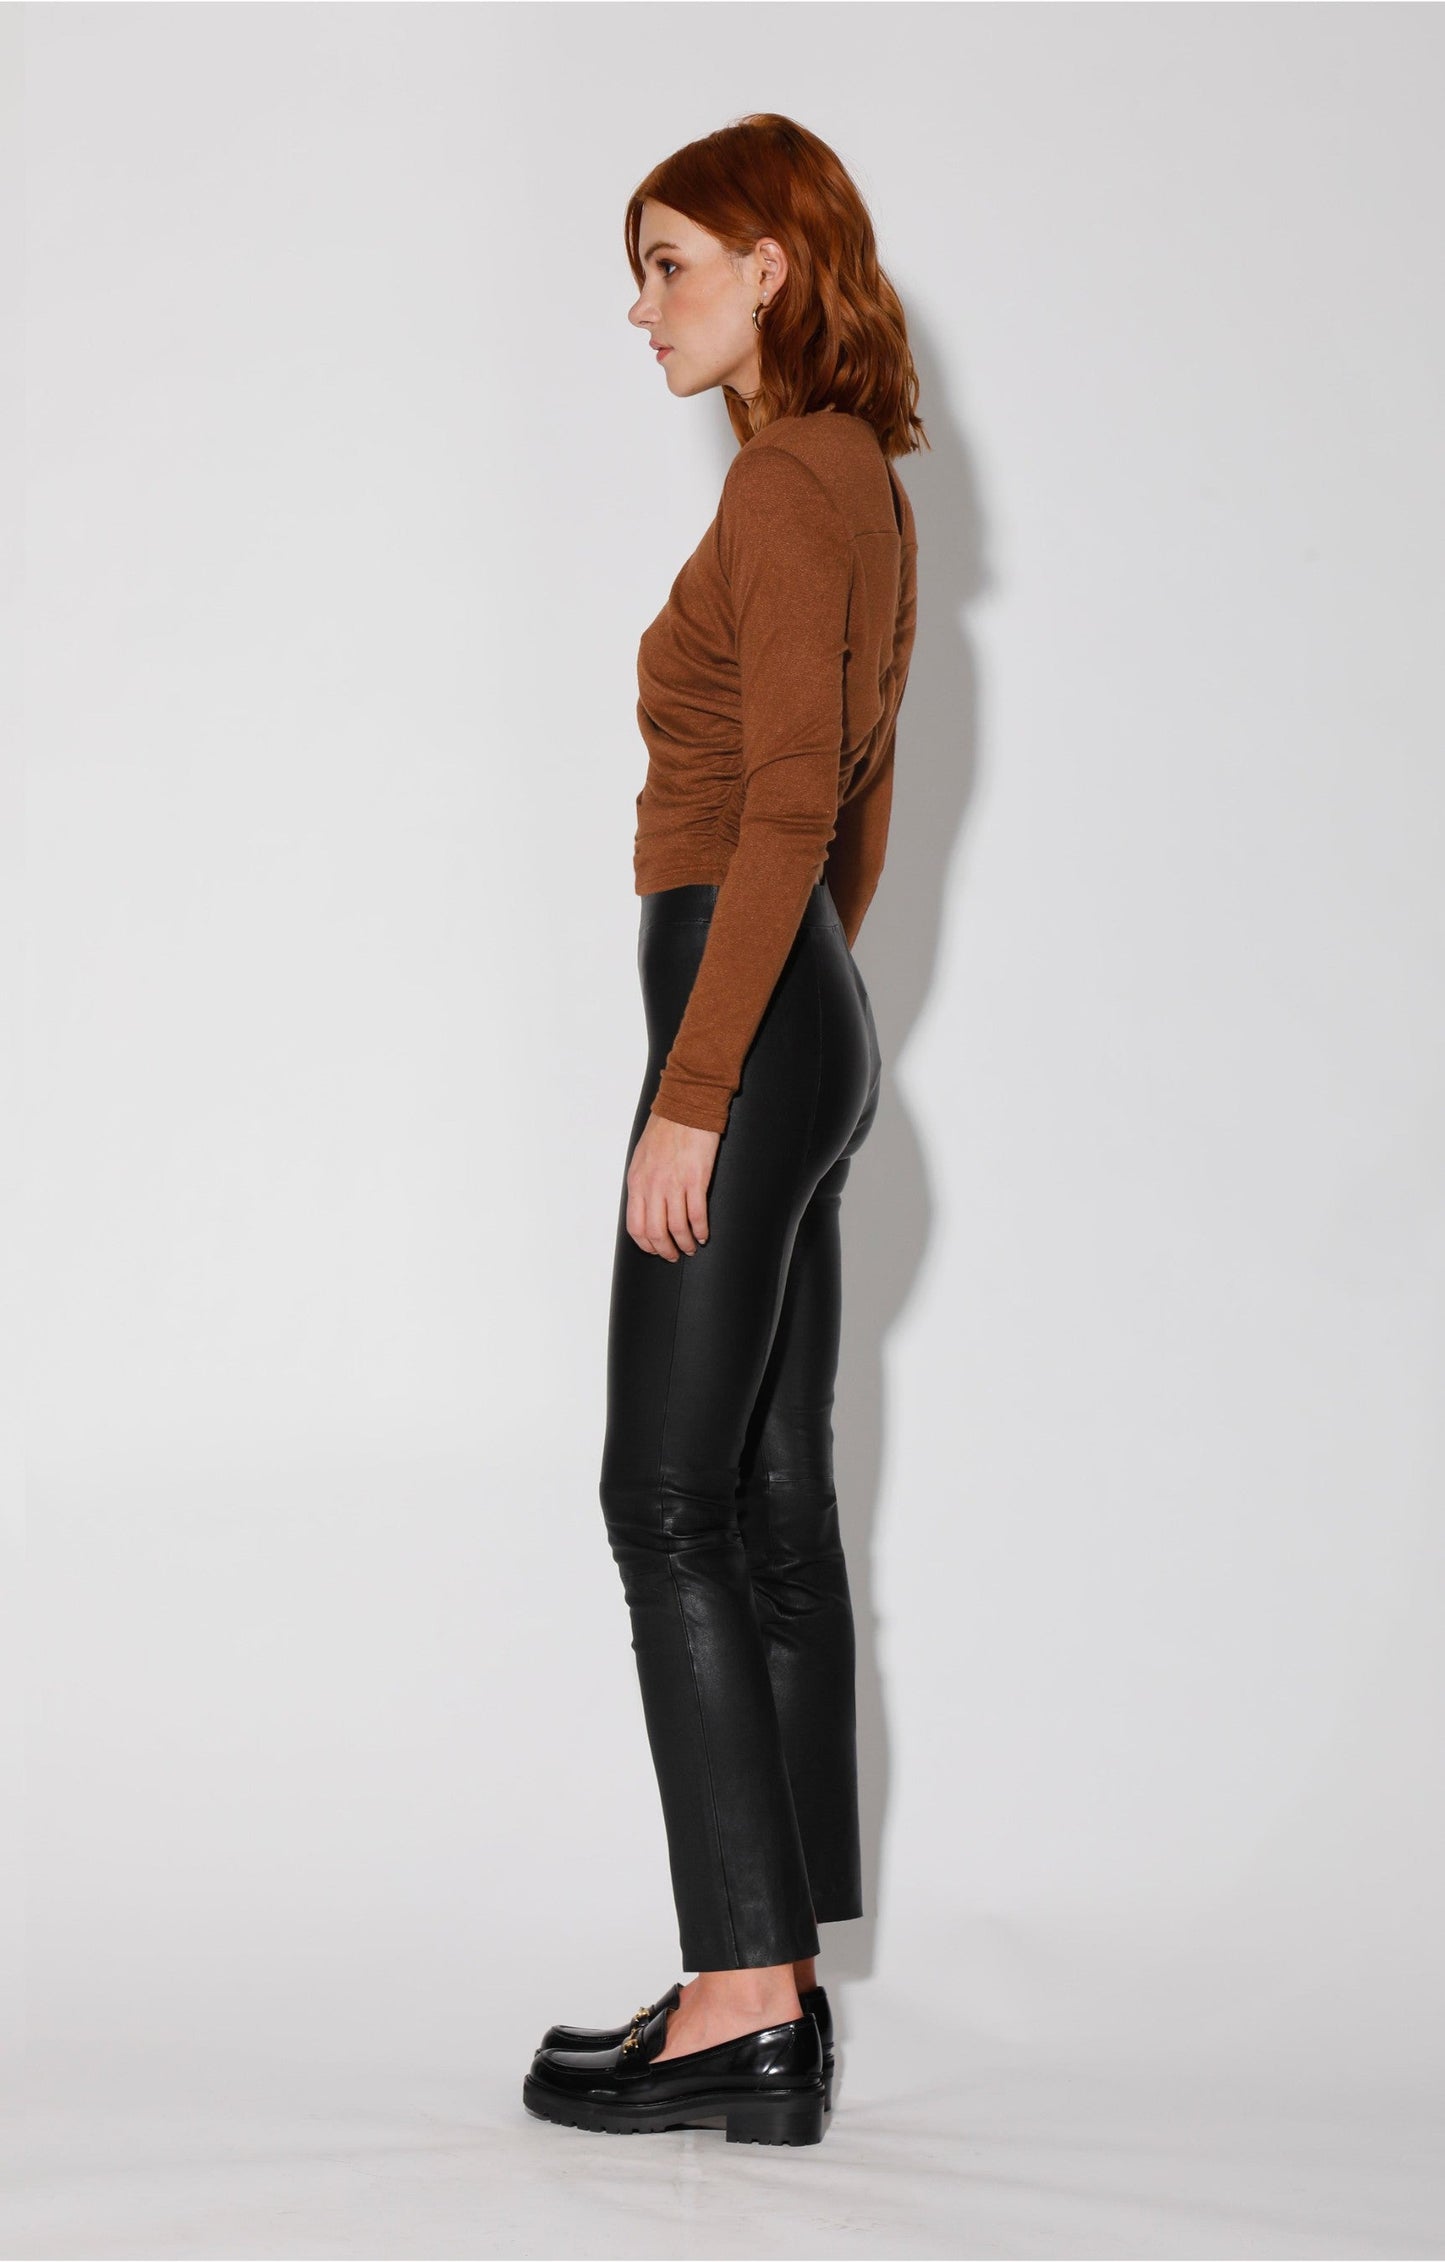 Karina Pant, Black - Stretch Leather by Walter Baker